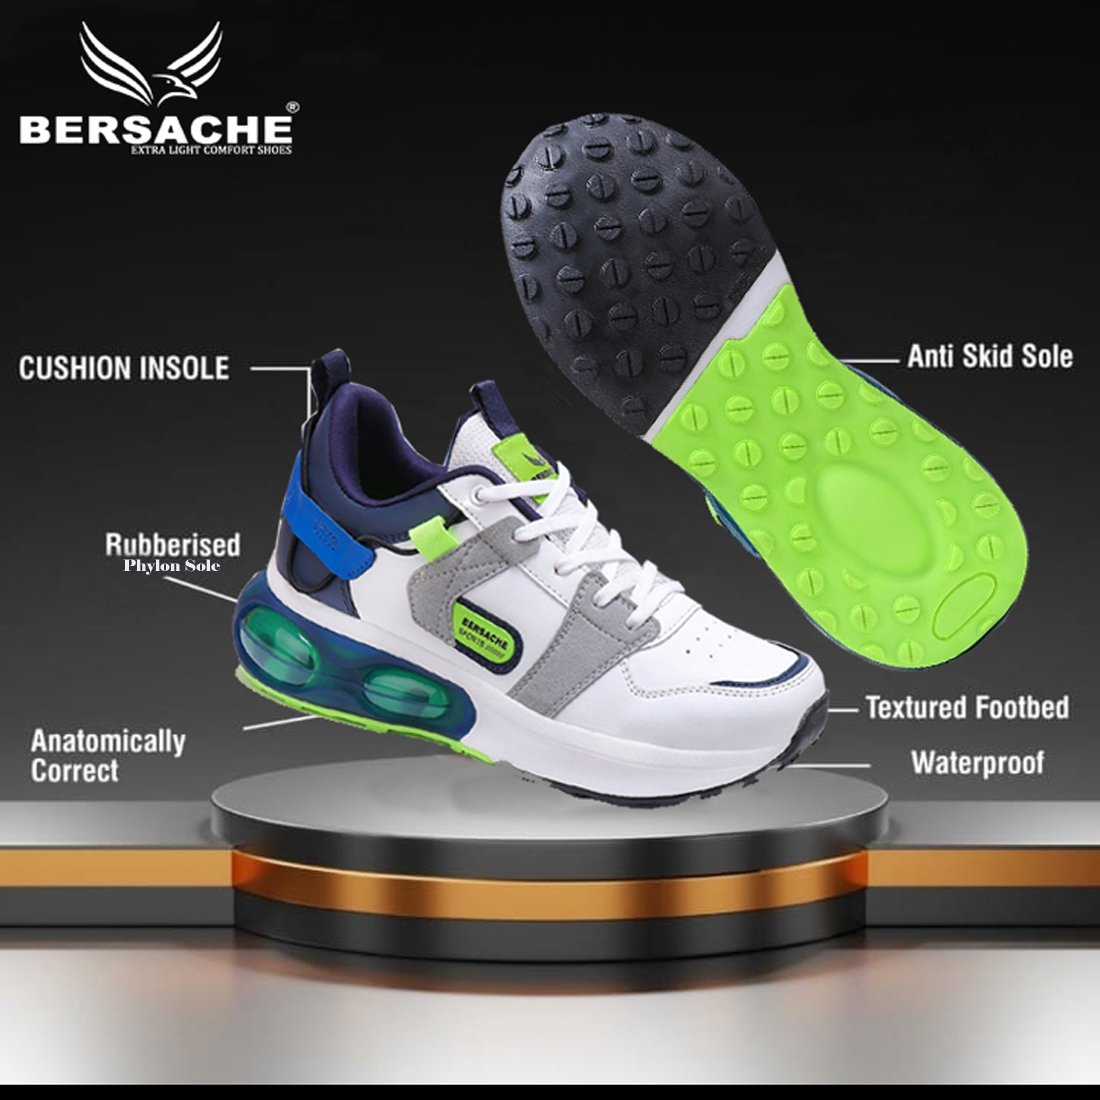 BERSACHE Bersache Sports Shoes For Men|Red For Running,Walking,gym and  hiking Shoes Running Shoes For Men - Buy BERSACHE Bersache Sports Shoes For  Men|Red For Running,Walking,gym and hiking Shoes Running Shoes For Men